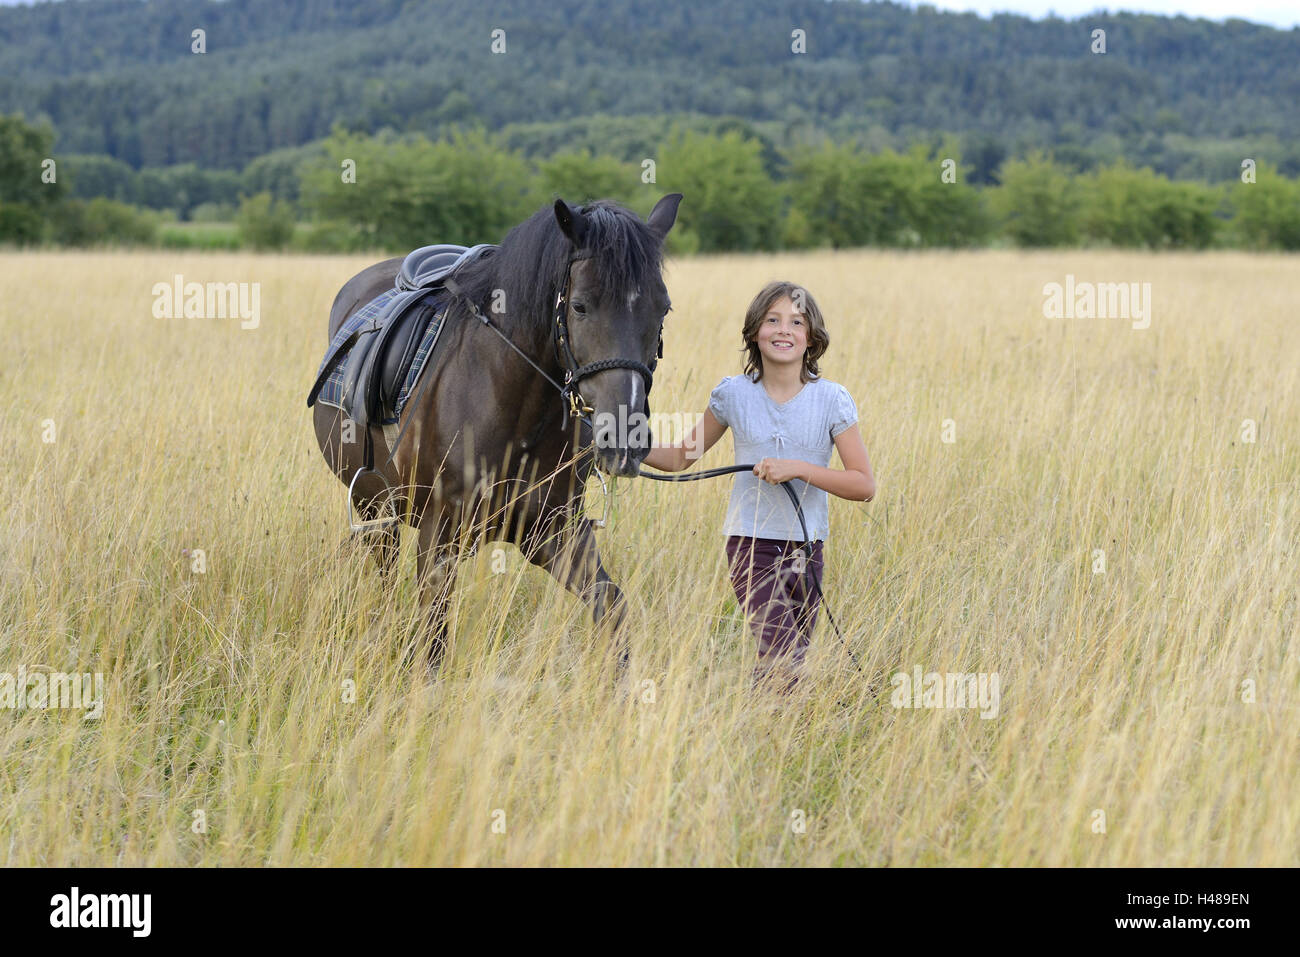 Girl, horse, meadow, looking at camera, landscape, Stock Photo